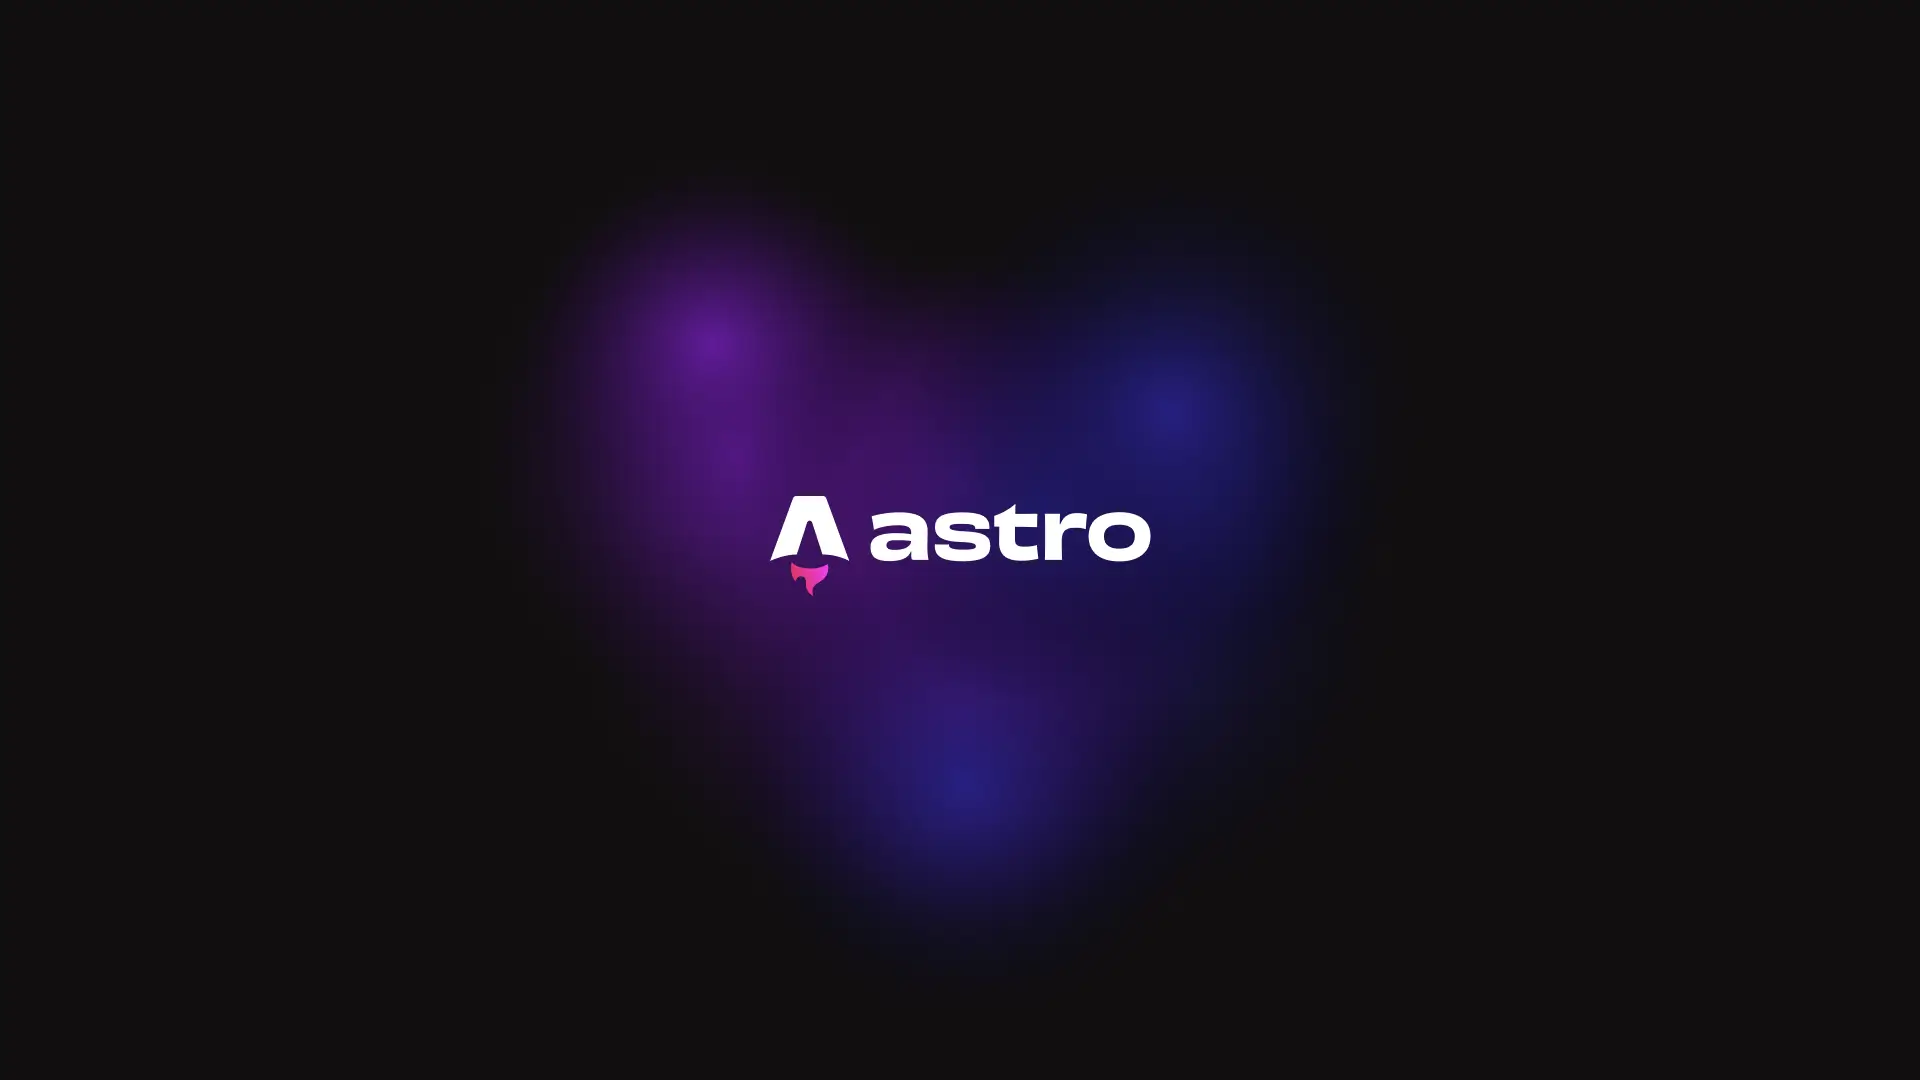 How I fell in love with Astro